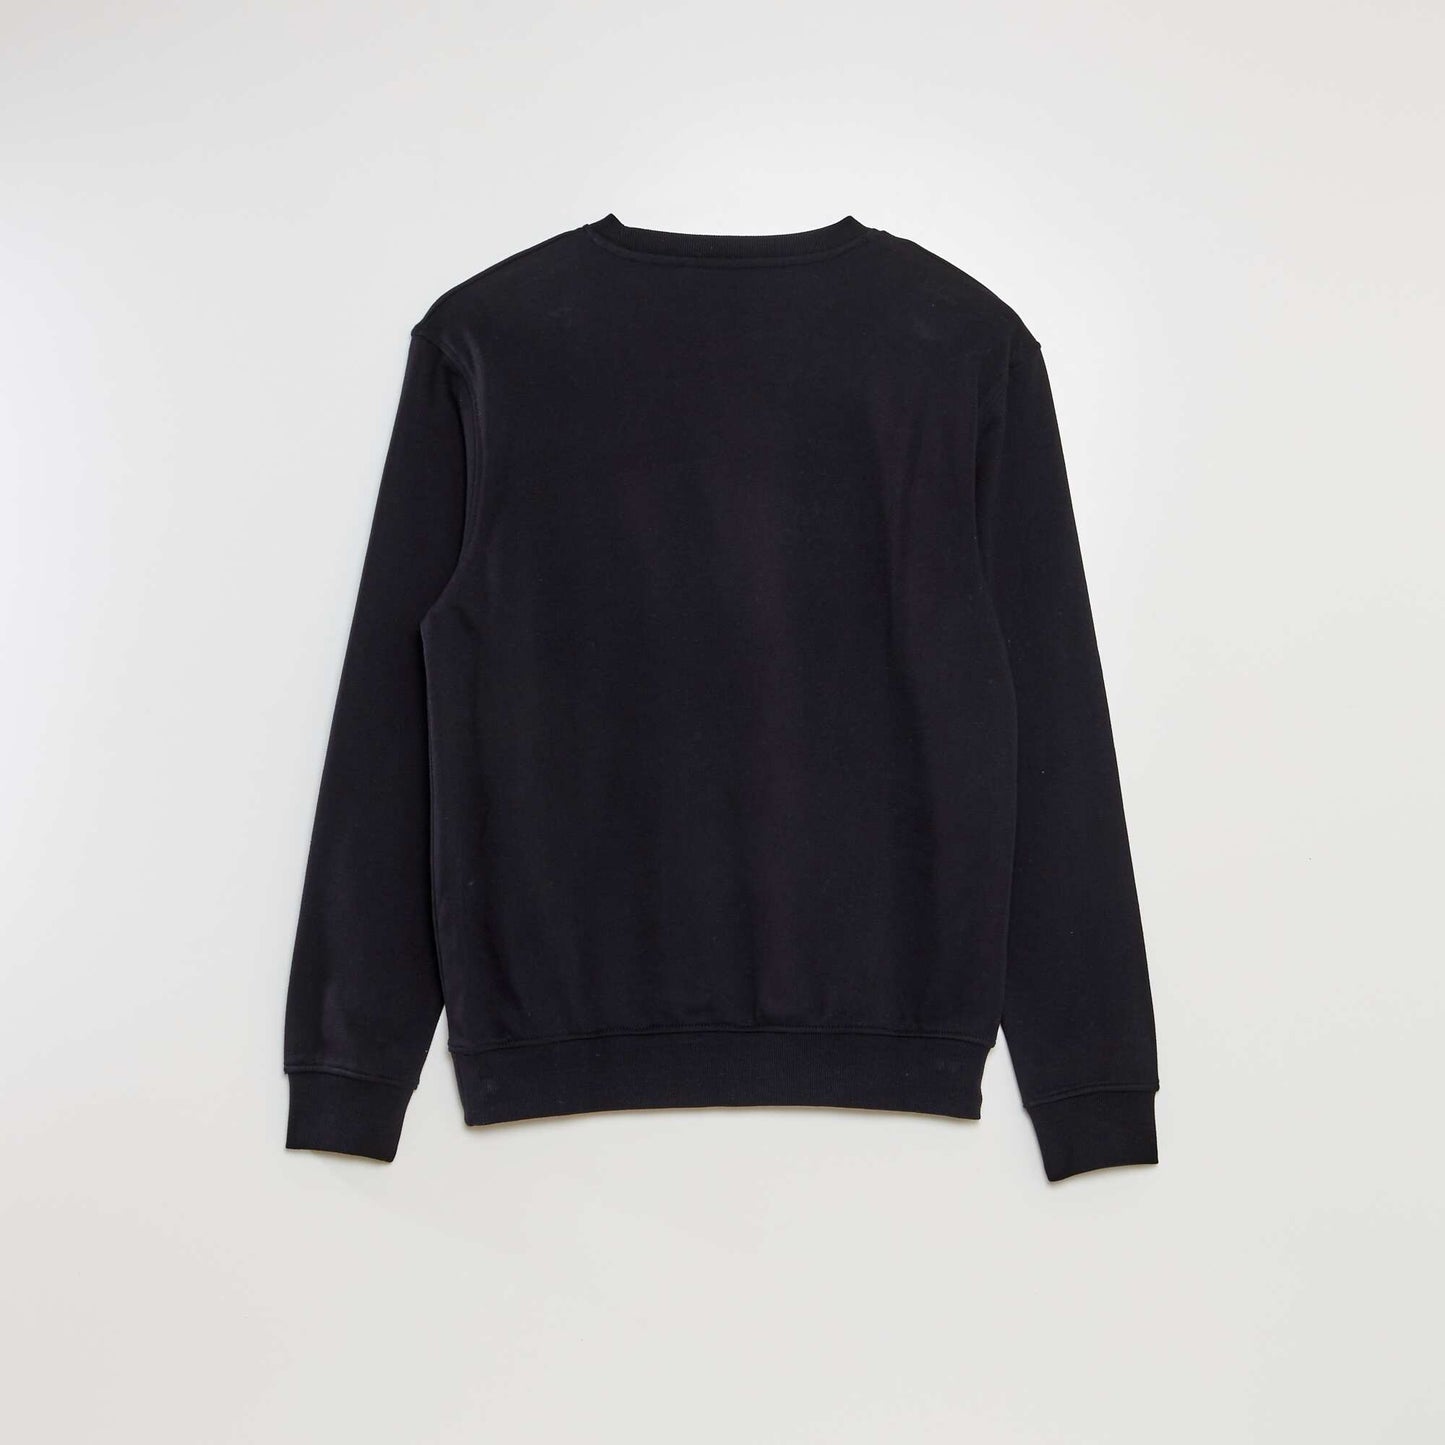 Plain French terry sweater REAL BLACK